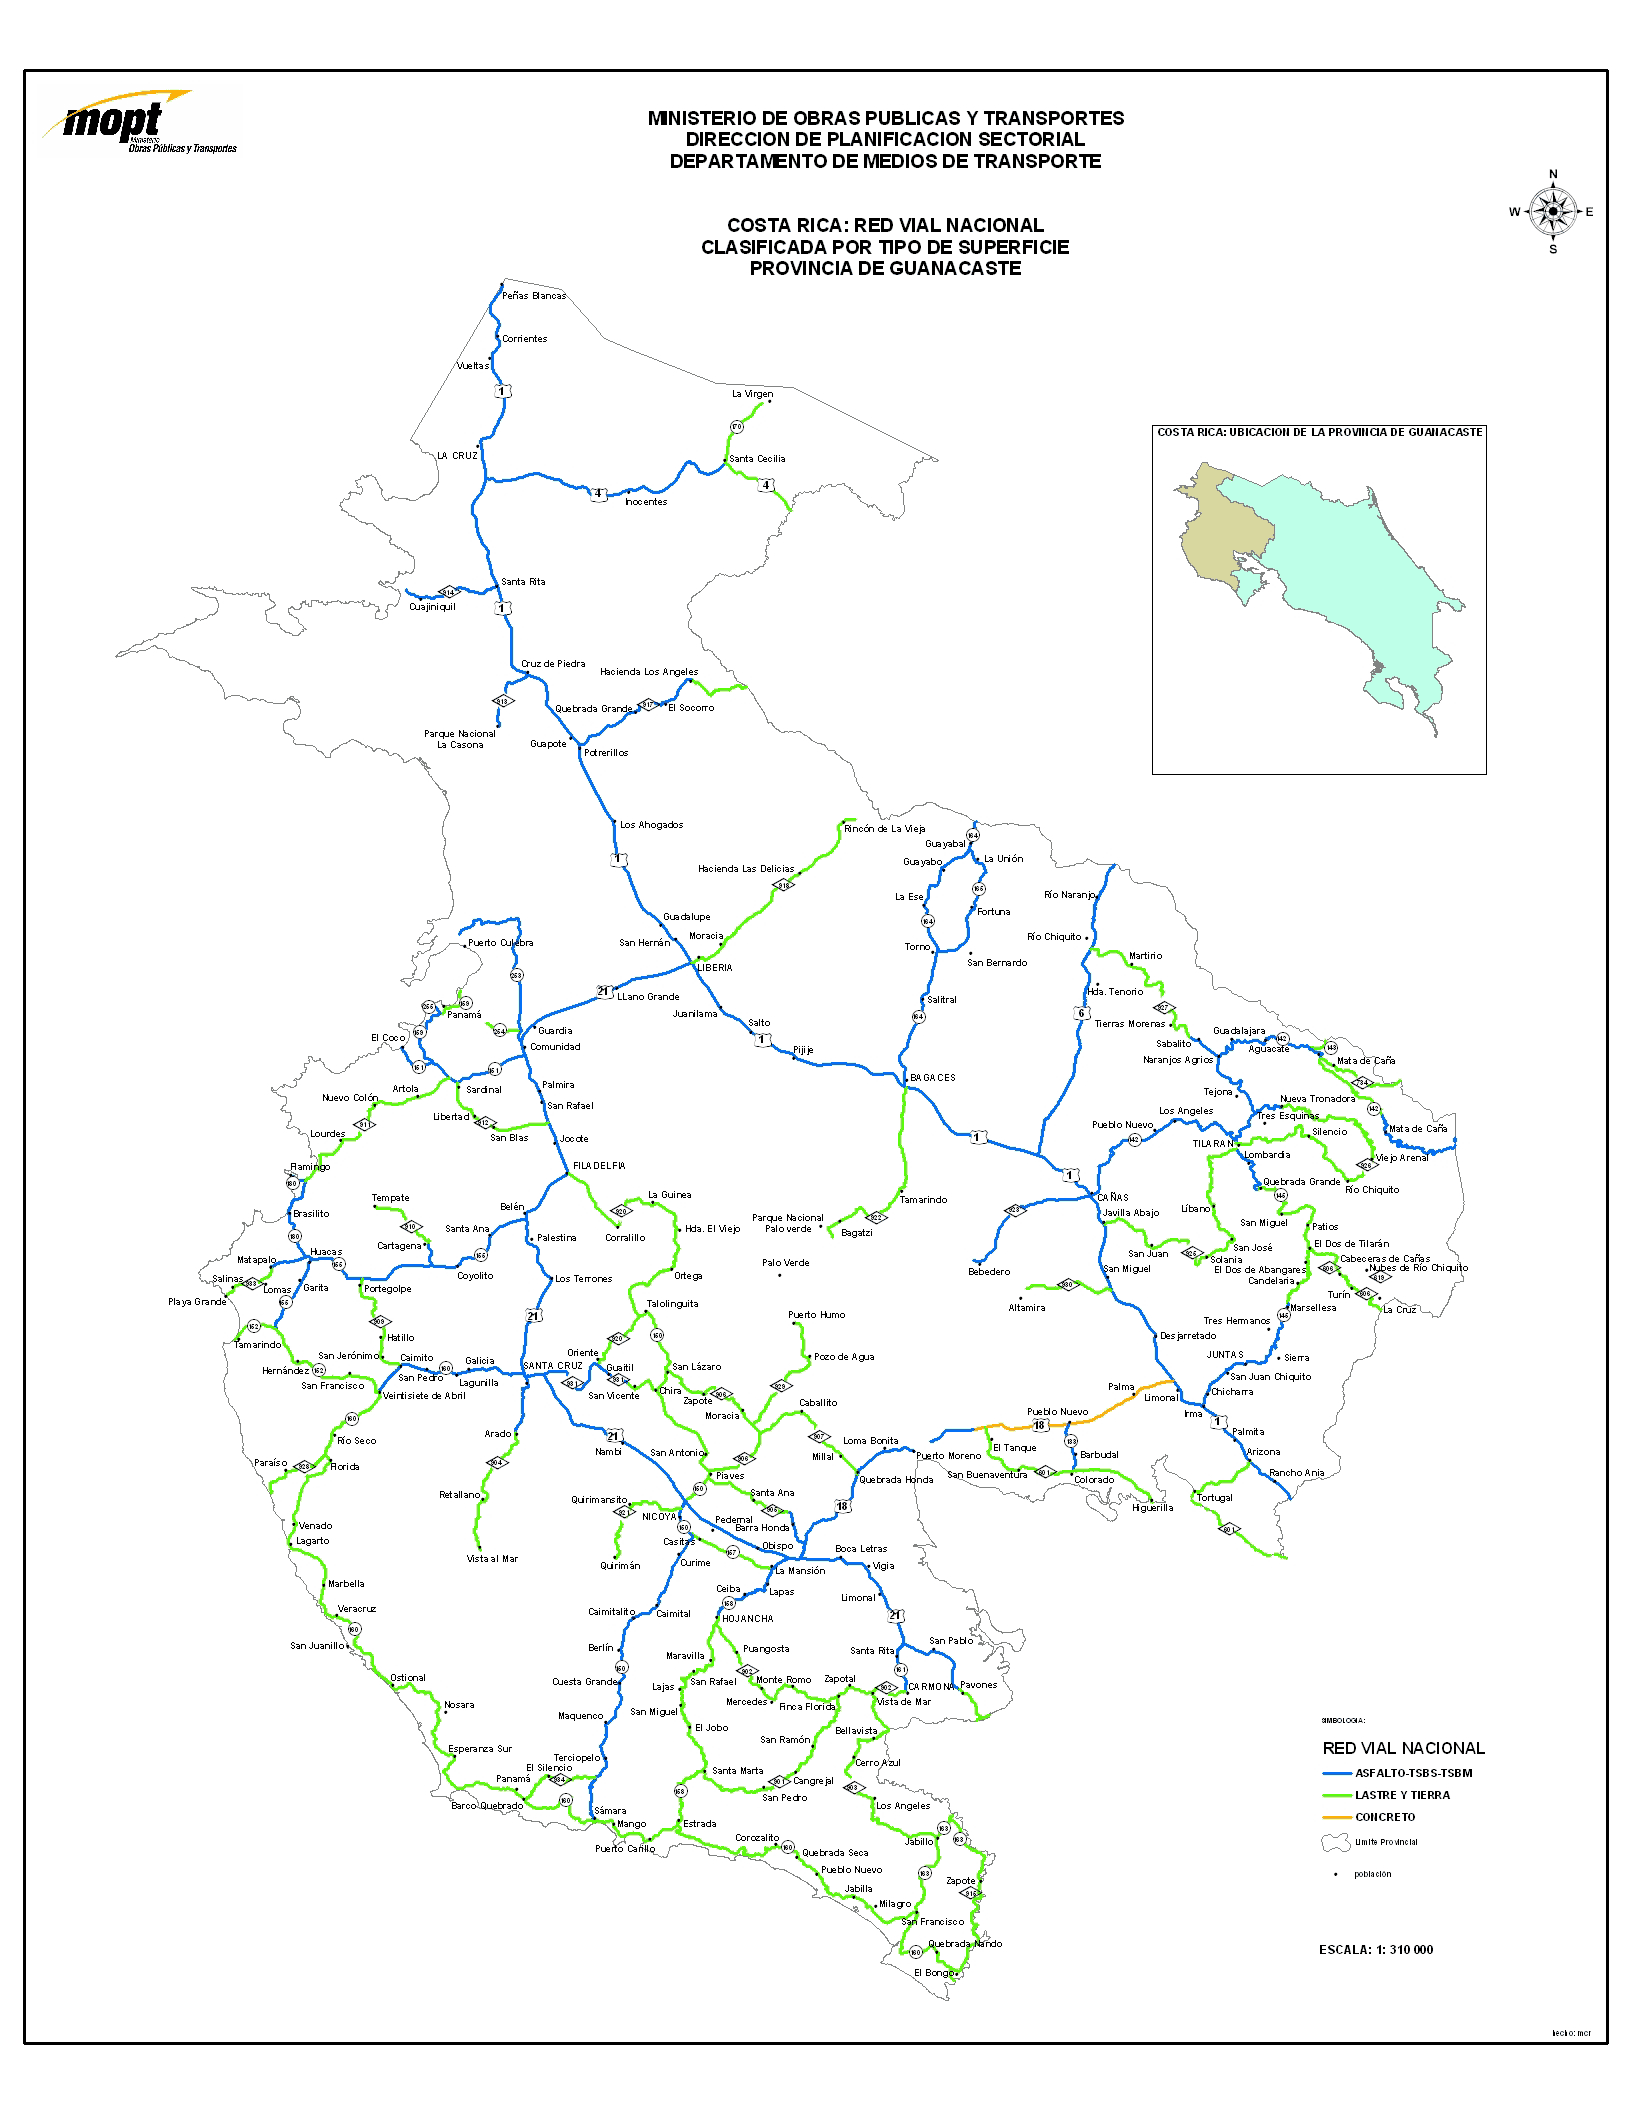 Guanacaste Province Roads, Type of Surface Map, Costa Rica